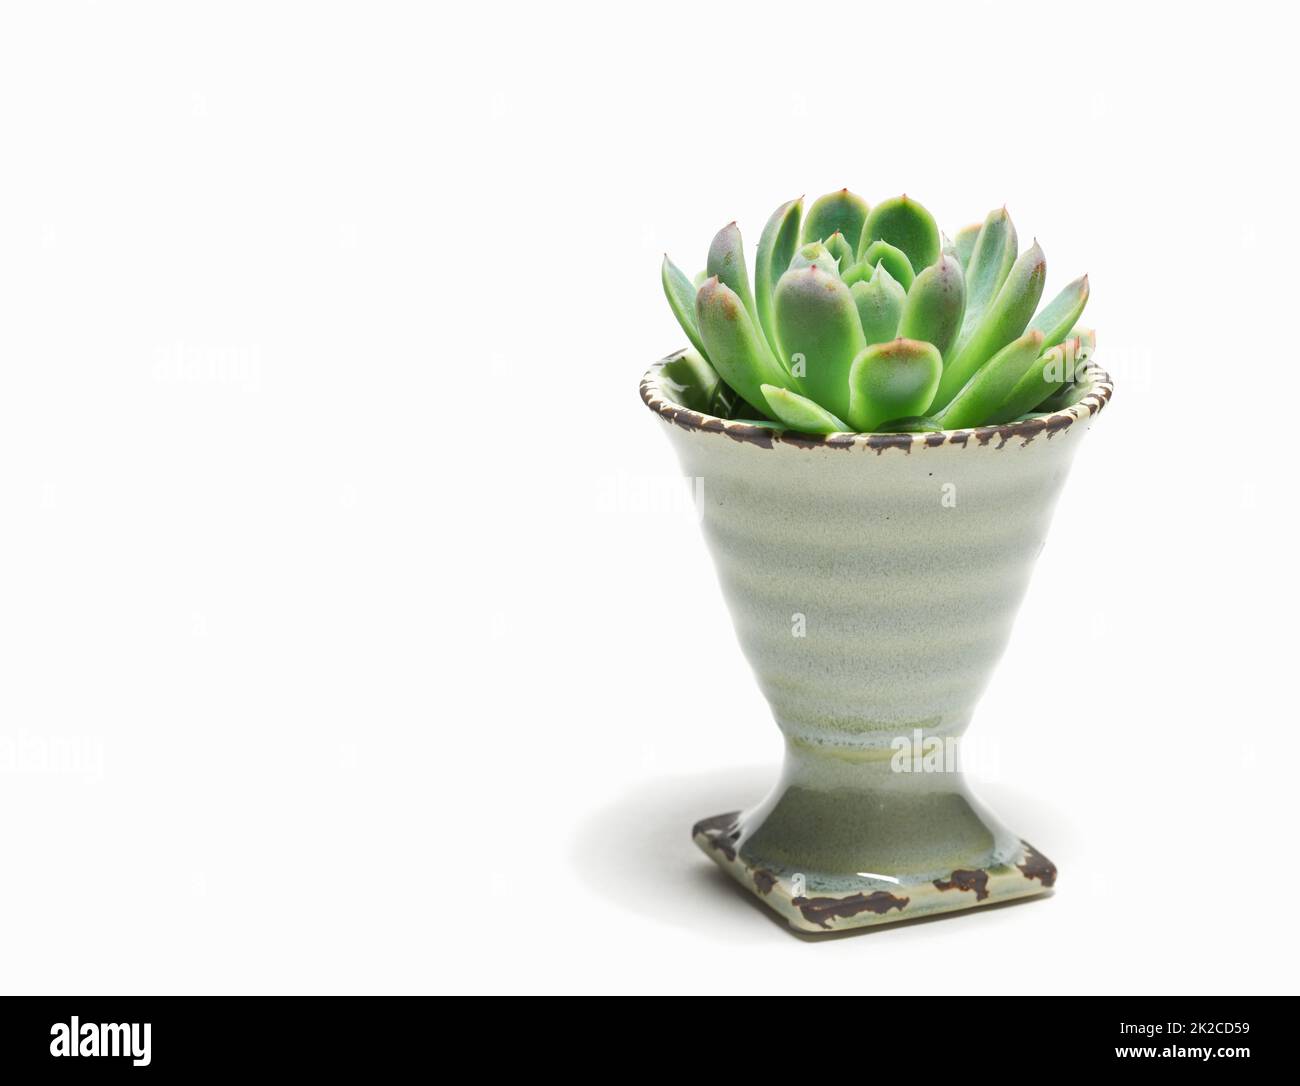 Get creative with succulent flowers. An Echeveria elegans succulent flower arranged in a porcelain eggcup - isolated. Stock Photo